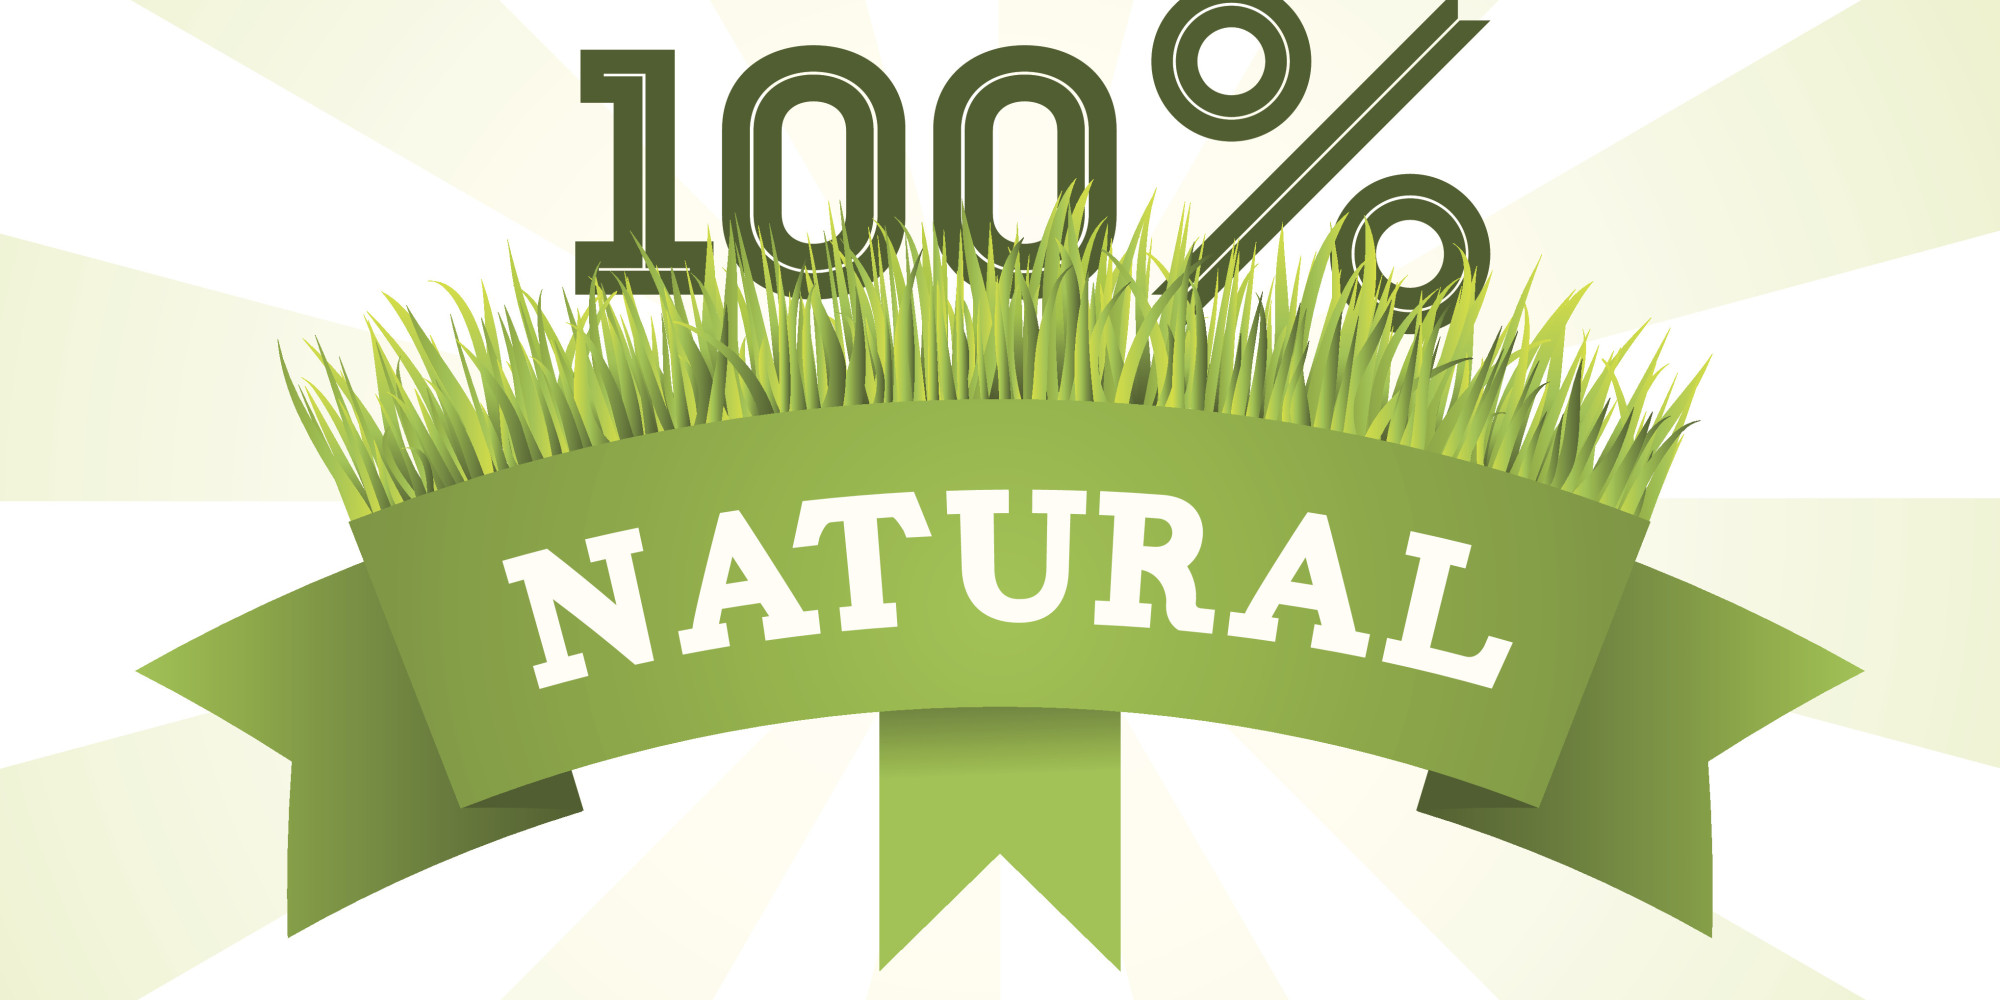 Consumer Reports demands ”natural” definition